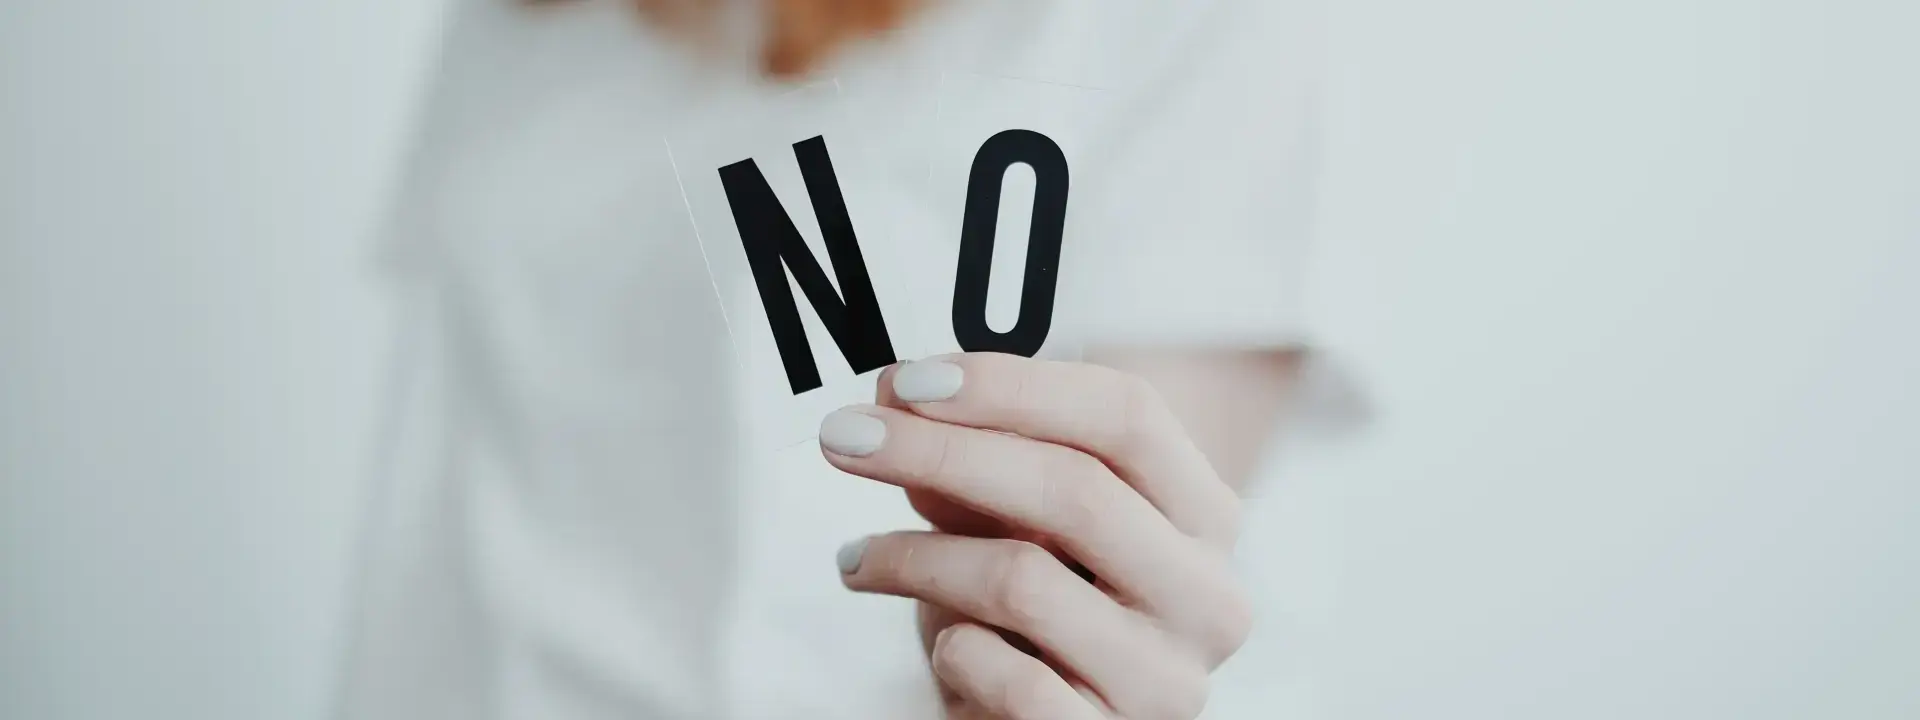 The Art of Saying No: Why Freelancers and Contractors Decline Work